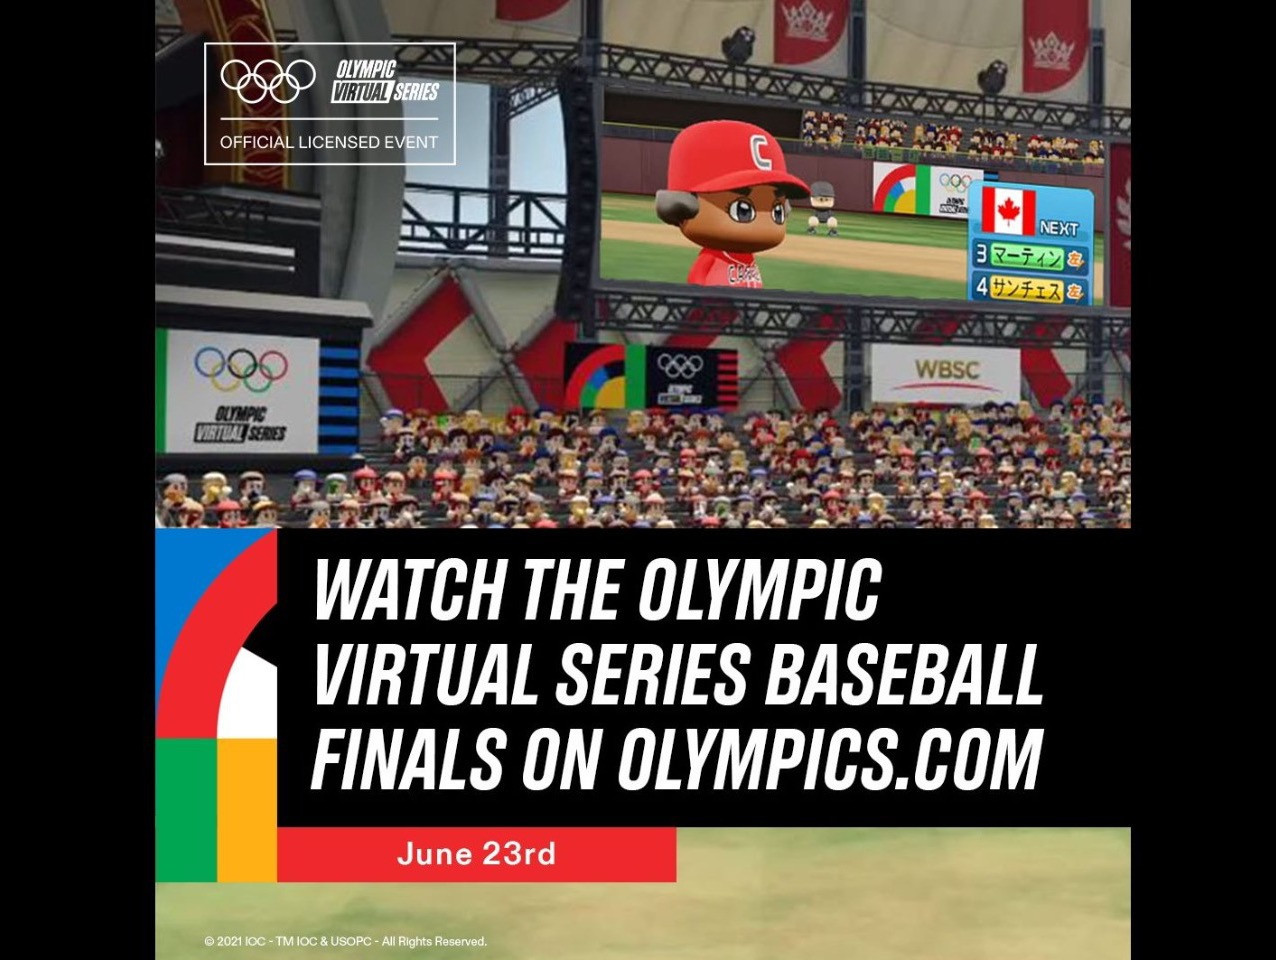 Olympic Virtual Series baseball finals to be broadcast worldwide